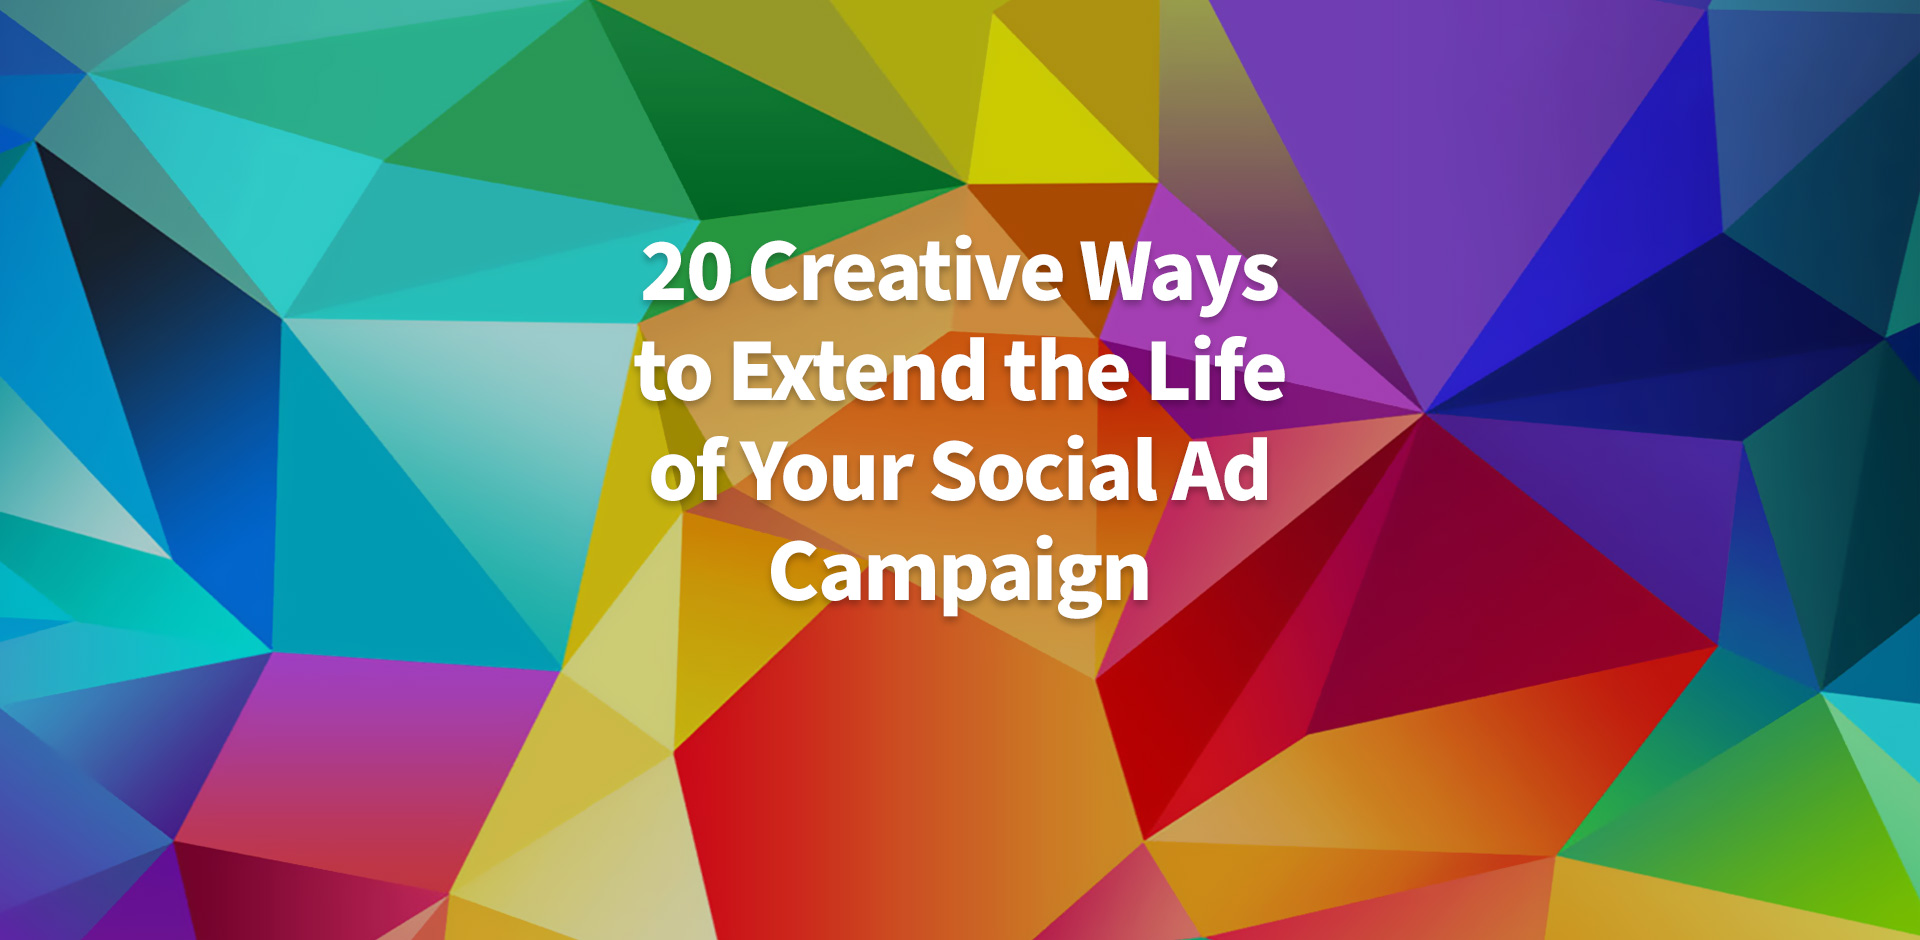 20 Creative Ways to Extend the Life of Your Social Ad Campaign